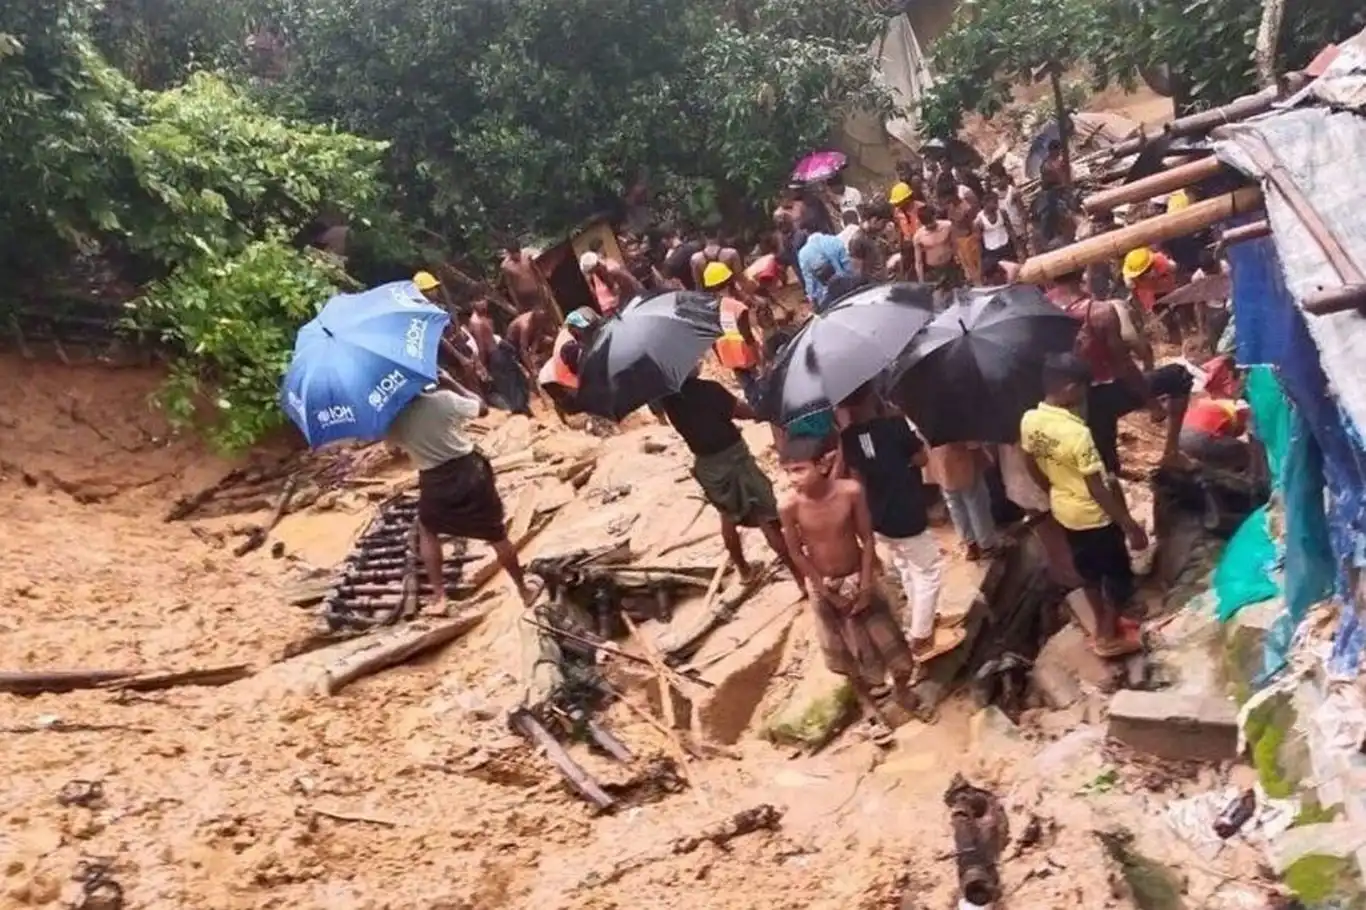 Deadly landslide in Cox’s Bazar refugee camps kills 10 amid heavy monsoon rains